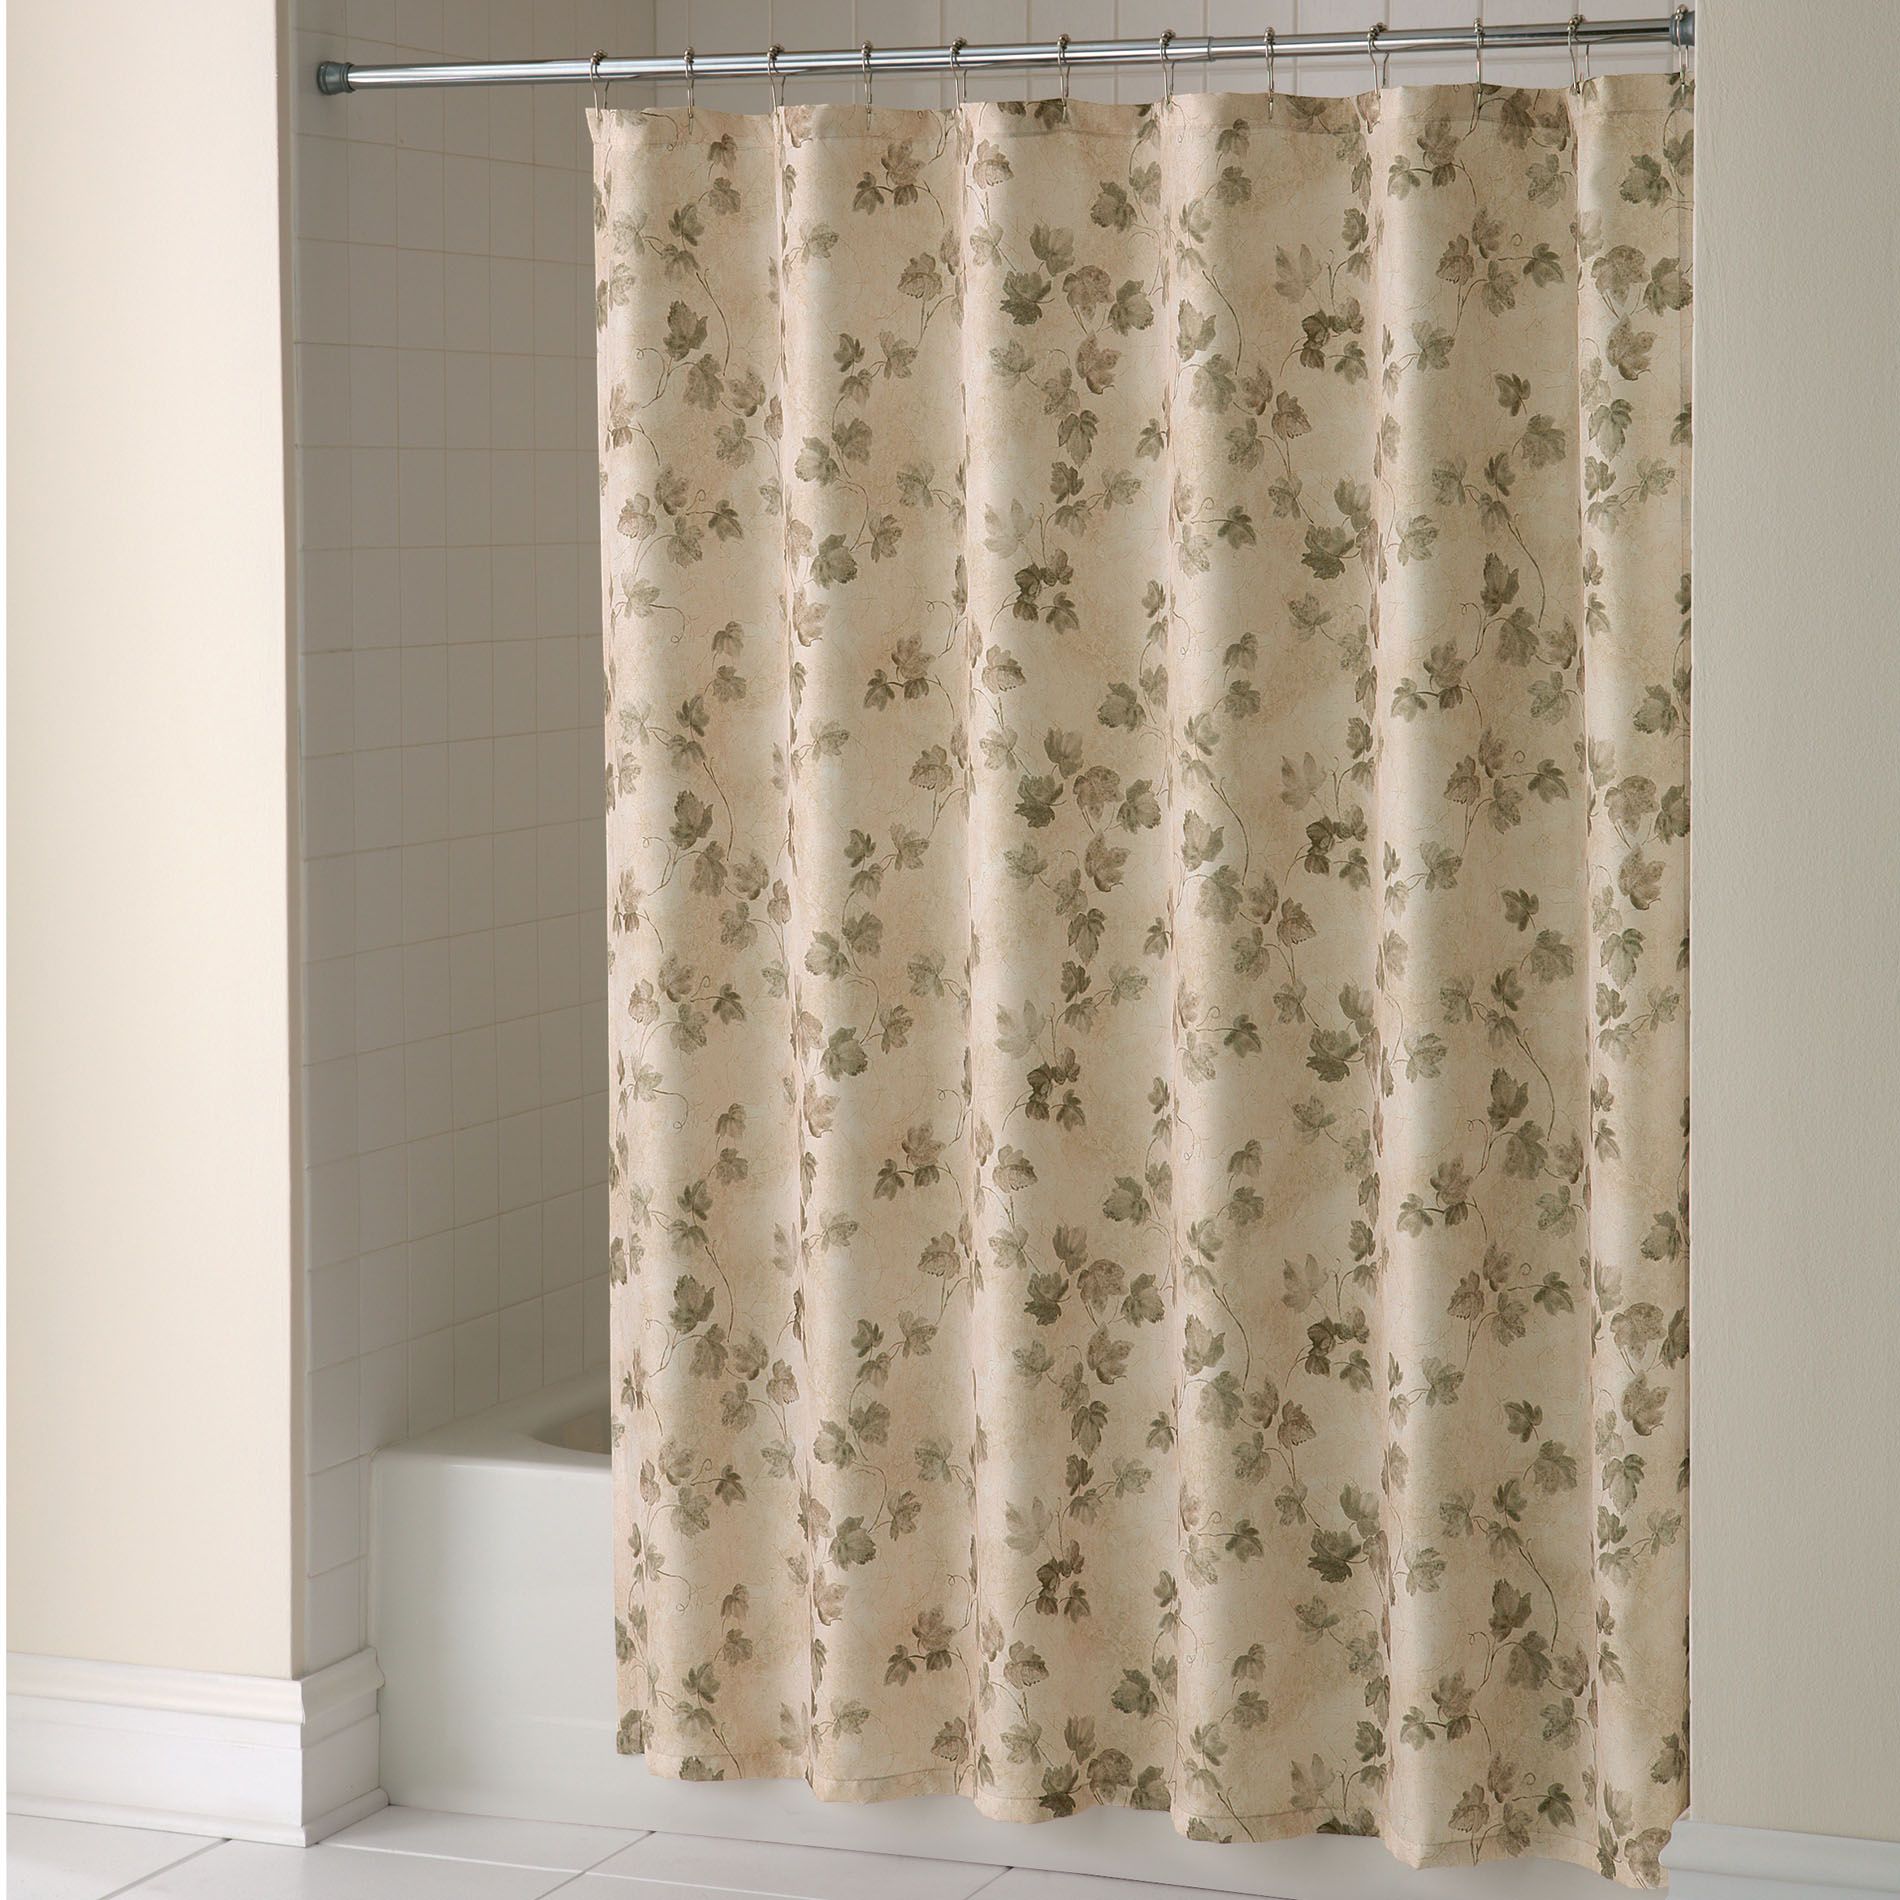 Shower Curtain Classic Ivy Fabric, Extra Long Shower Curtain Australia